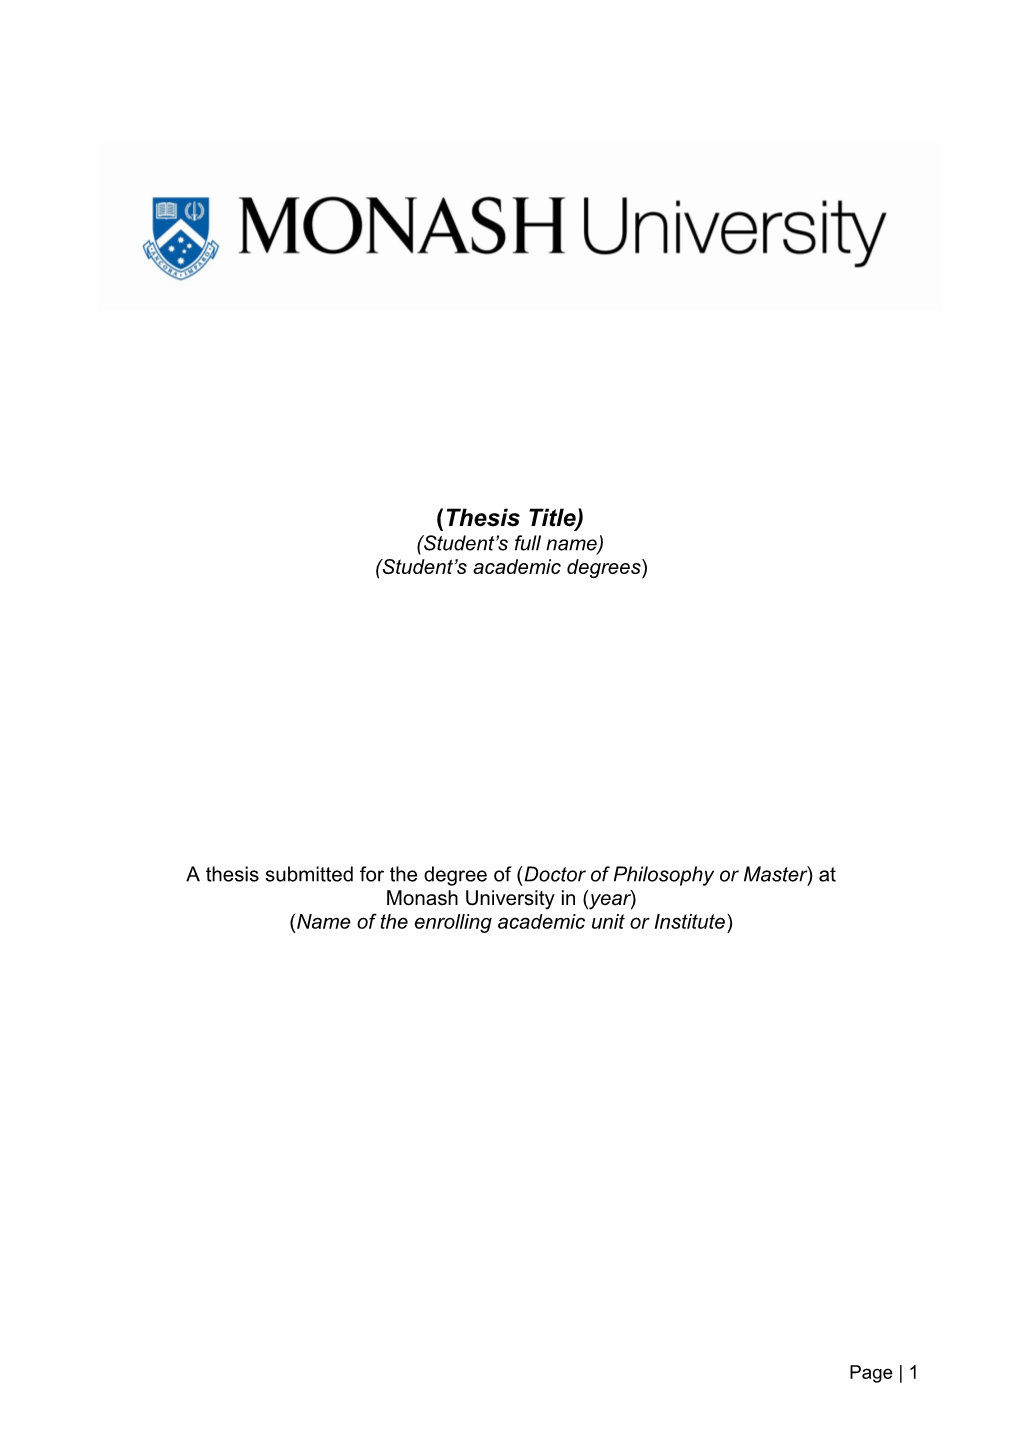 A Thesis Submitted for the Degree of (Doctor of Philosophy Or Master) At